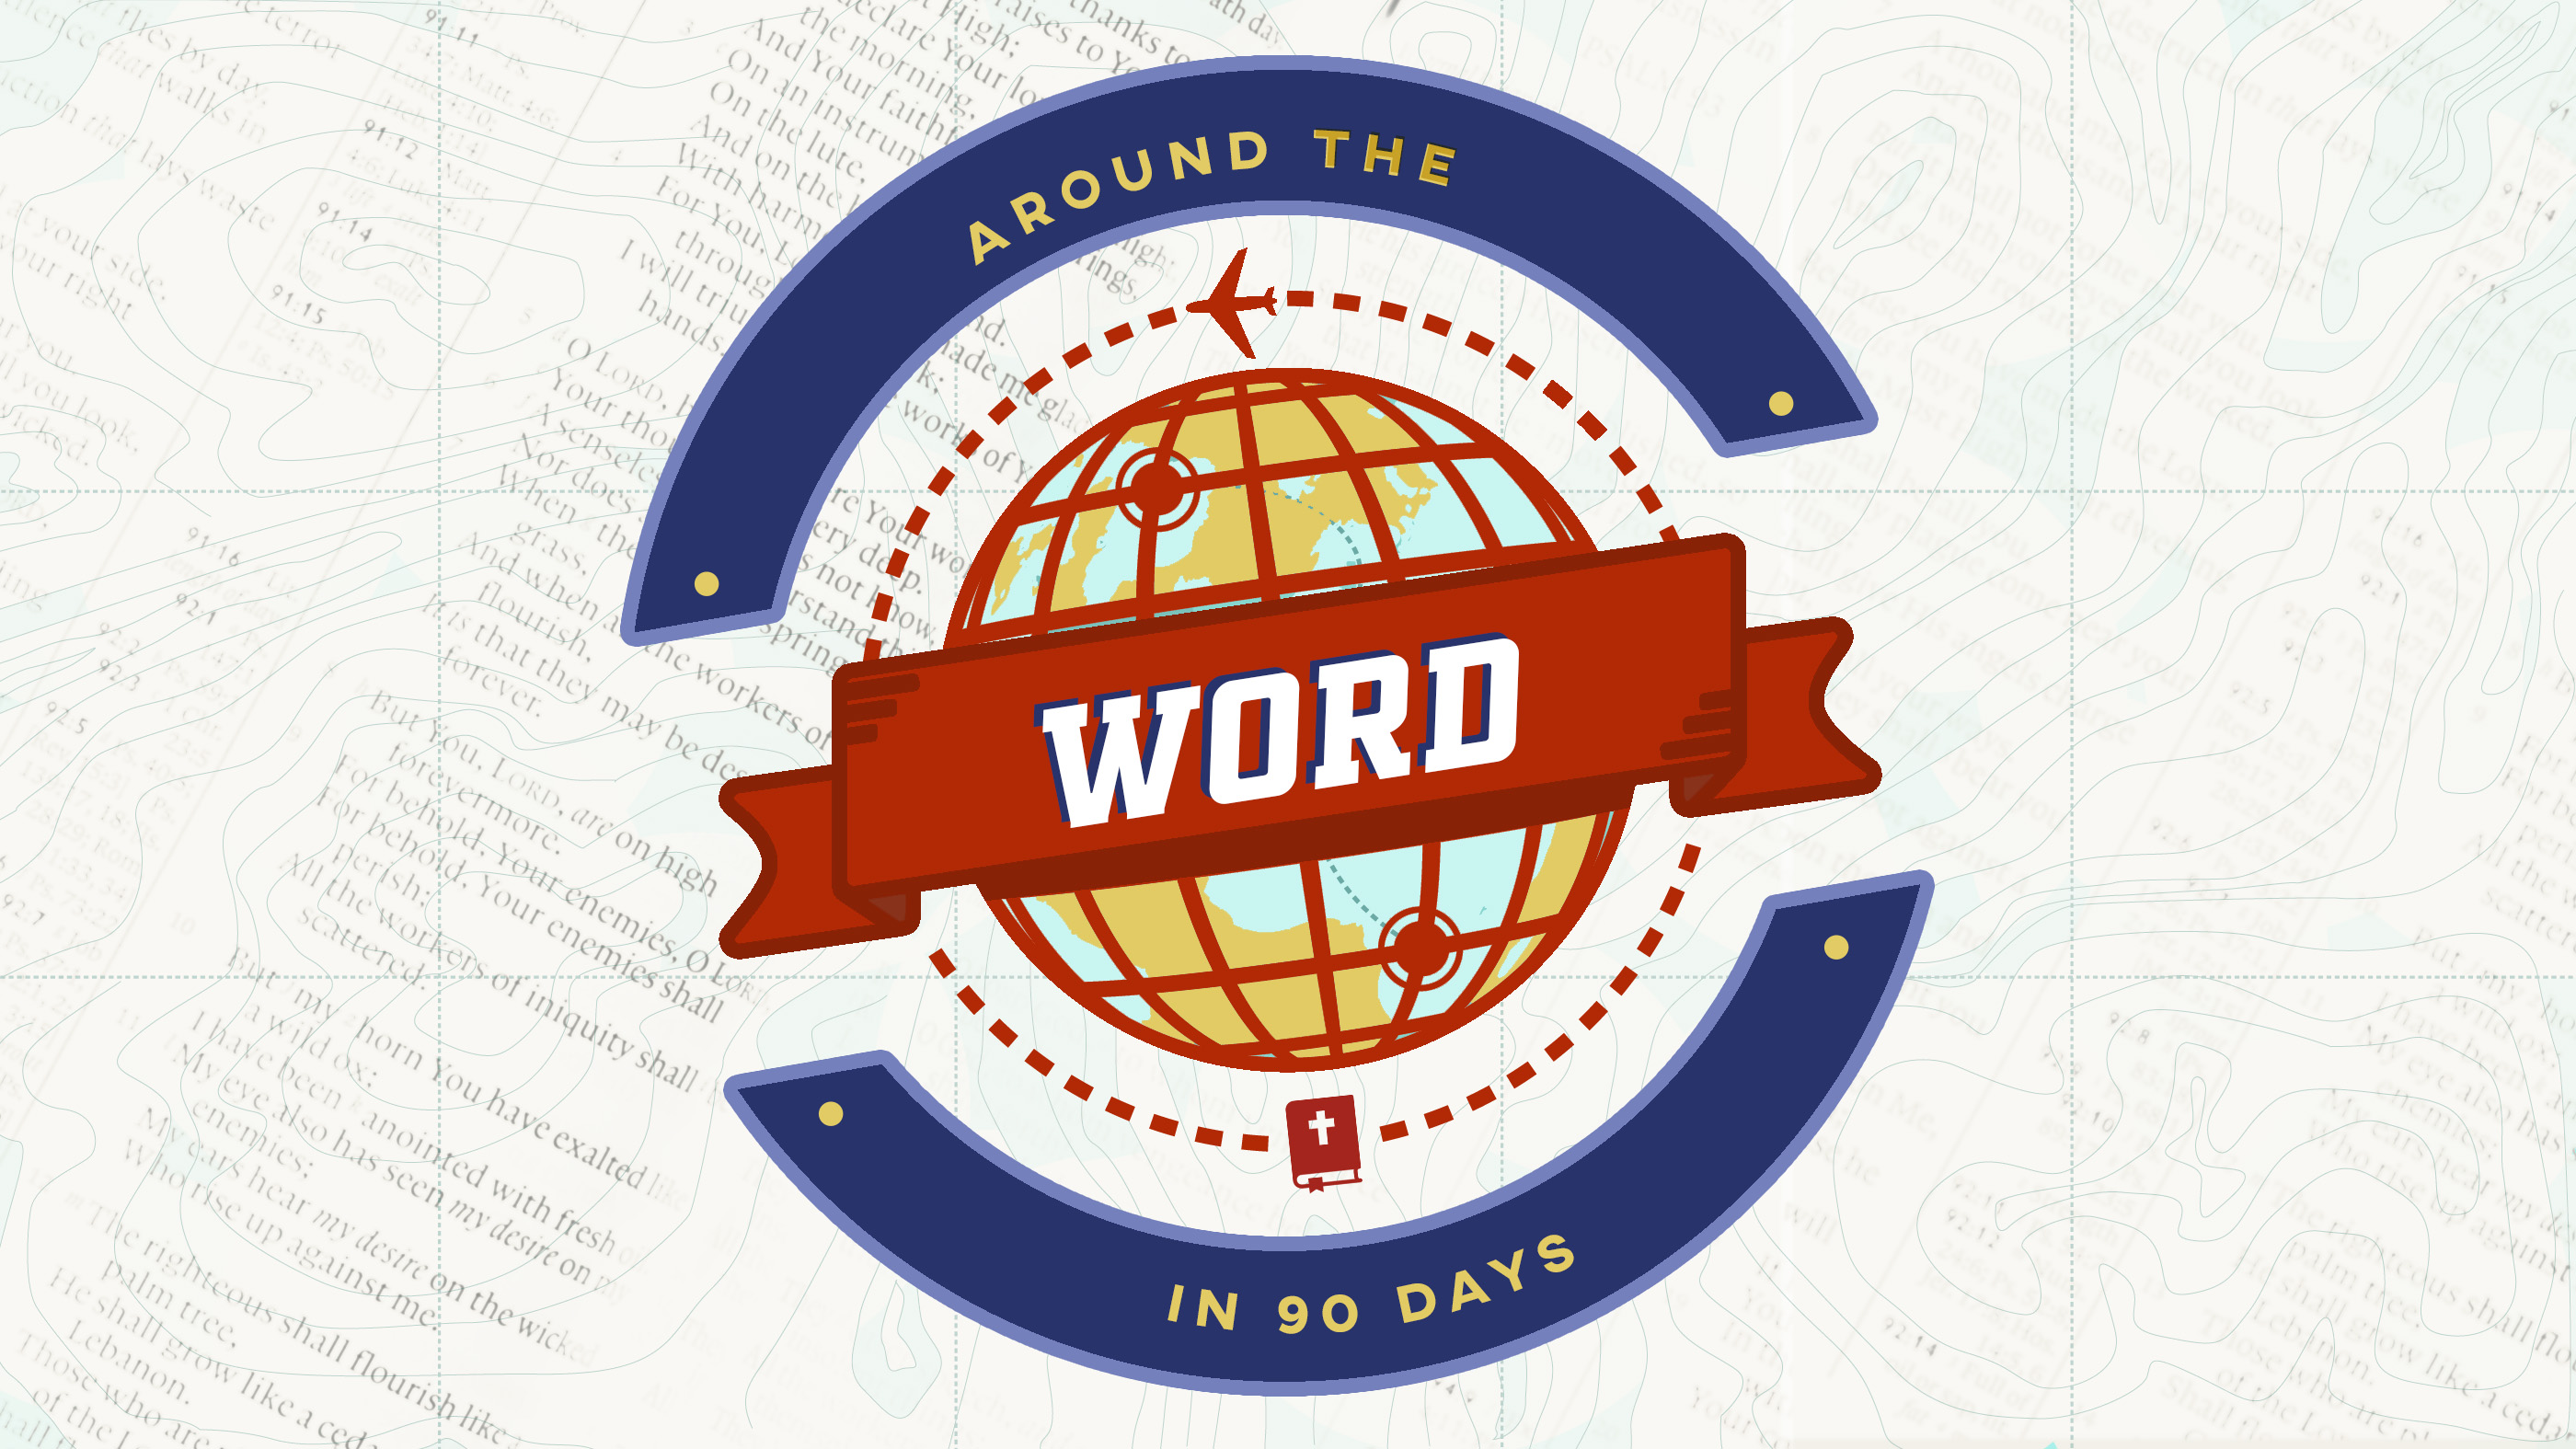 AROUND THE WORD IN 90 DAYS